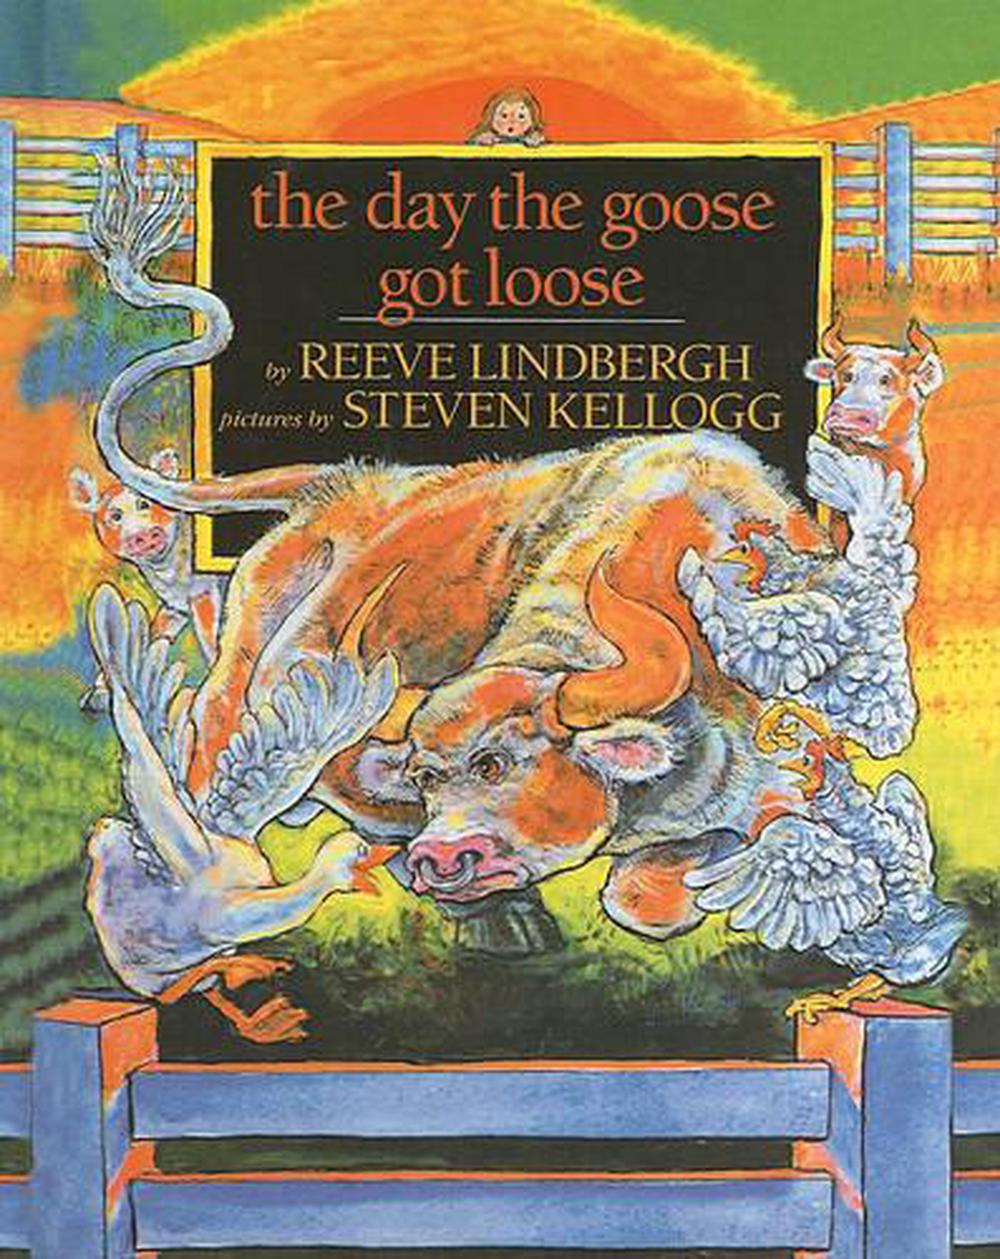 The Day the Goose Got Loose by Reeve Lindbergh (English) Prebound Book ...